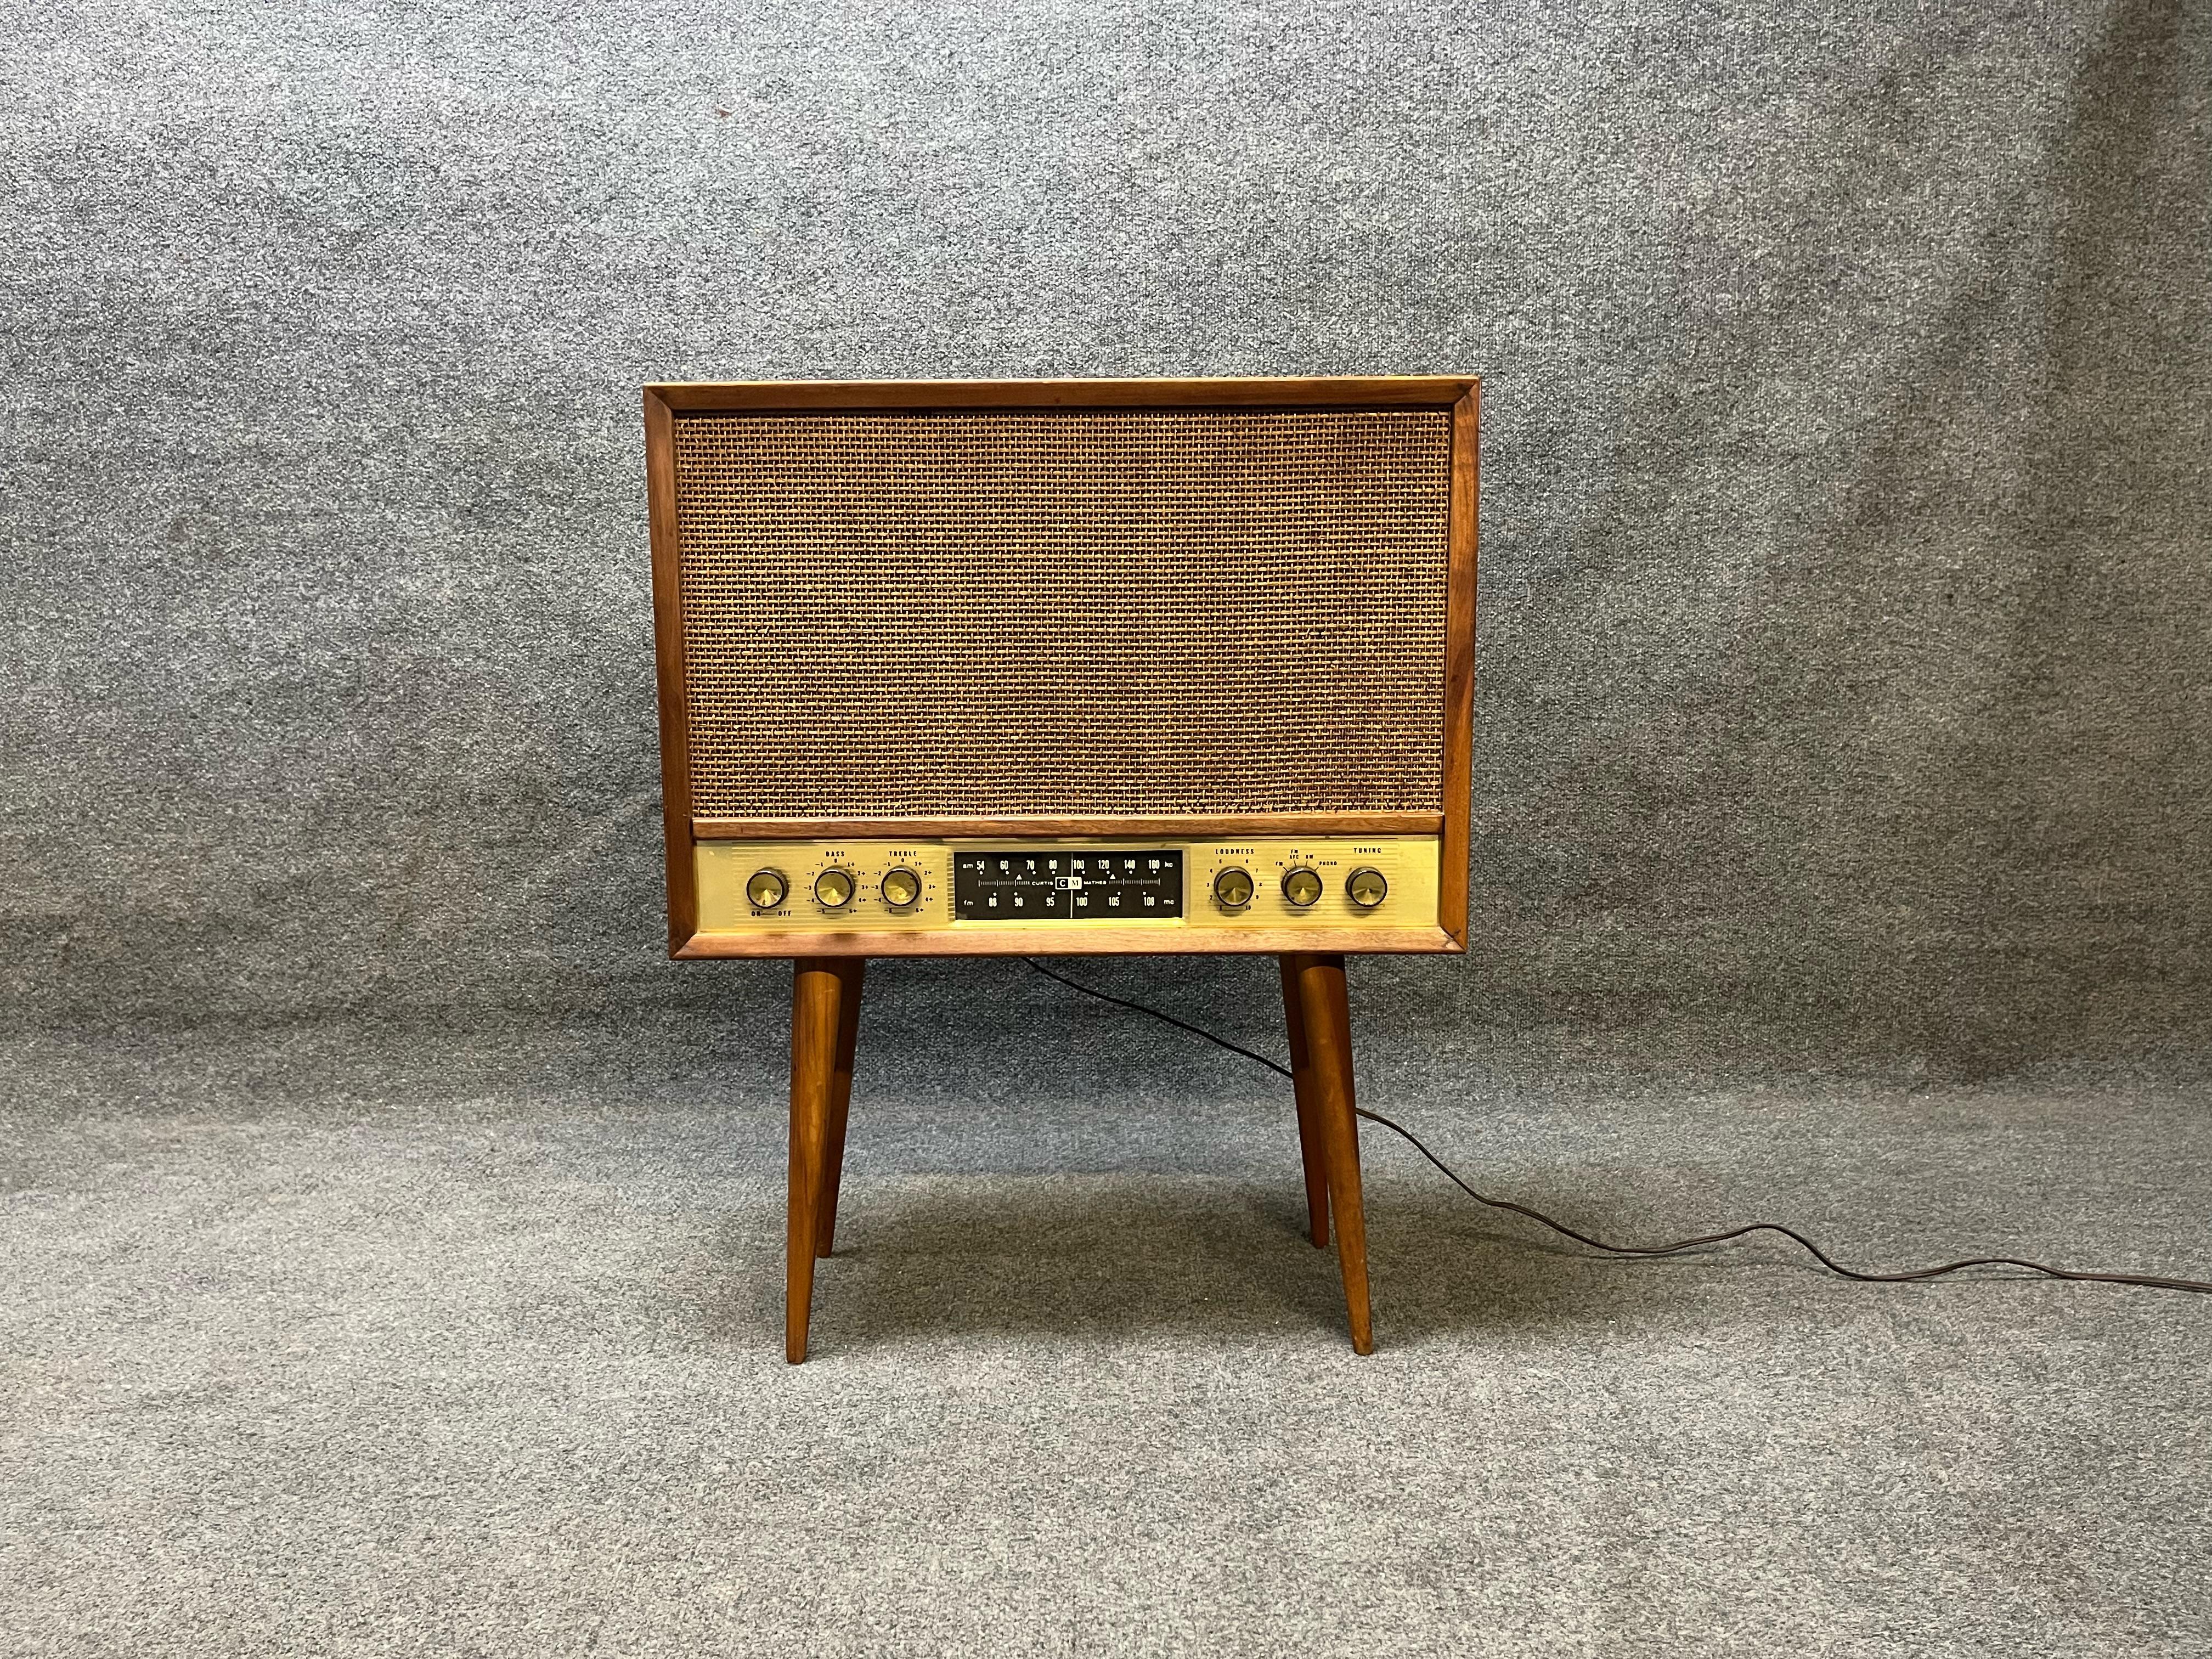 Here is an amazing vintage tube radio by Curtis Mathes. Radio has a brand new bluetooth connection in the back. All you have to do it connect to the bluetooth and you can play music from your phone or laptop. Sounds absolutely amazing. This is a one